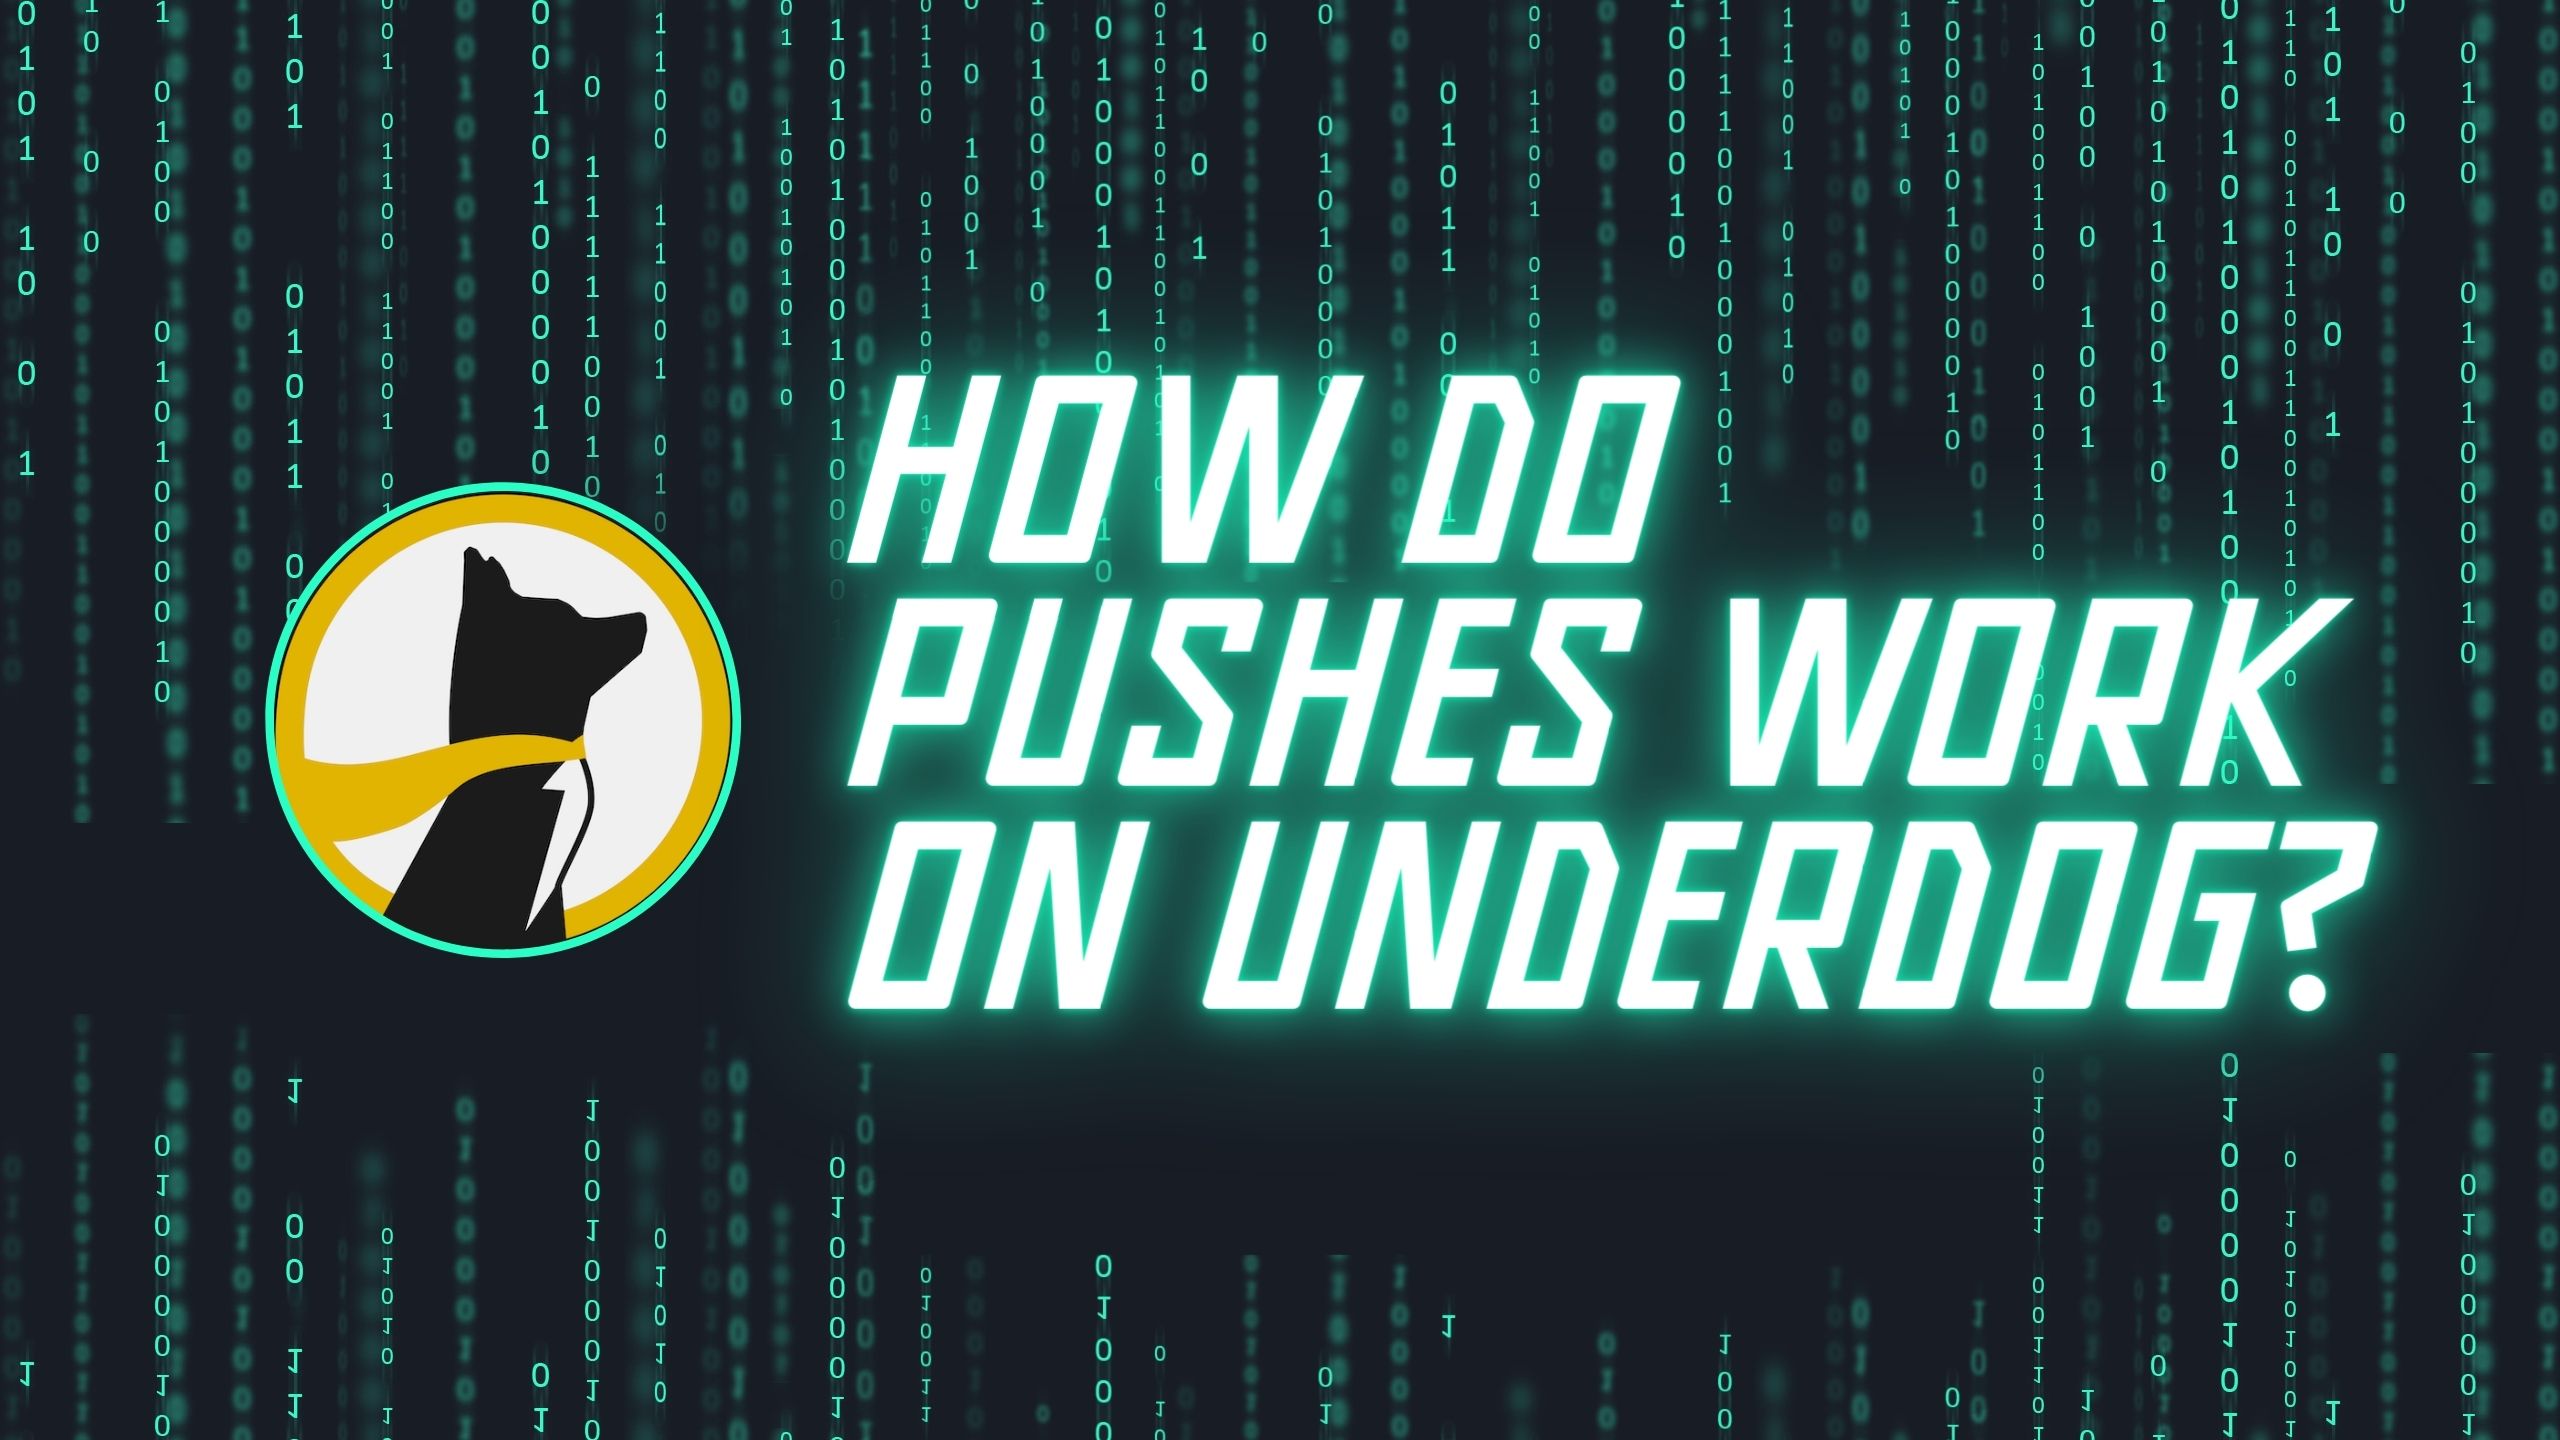 How The Underdog Works